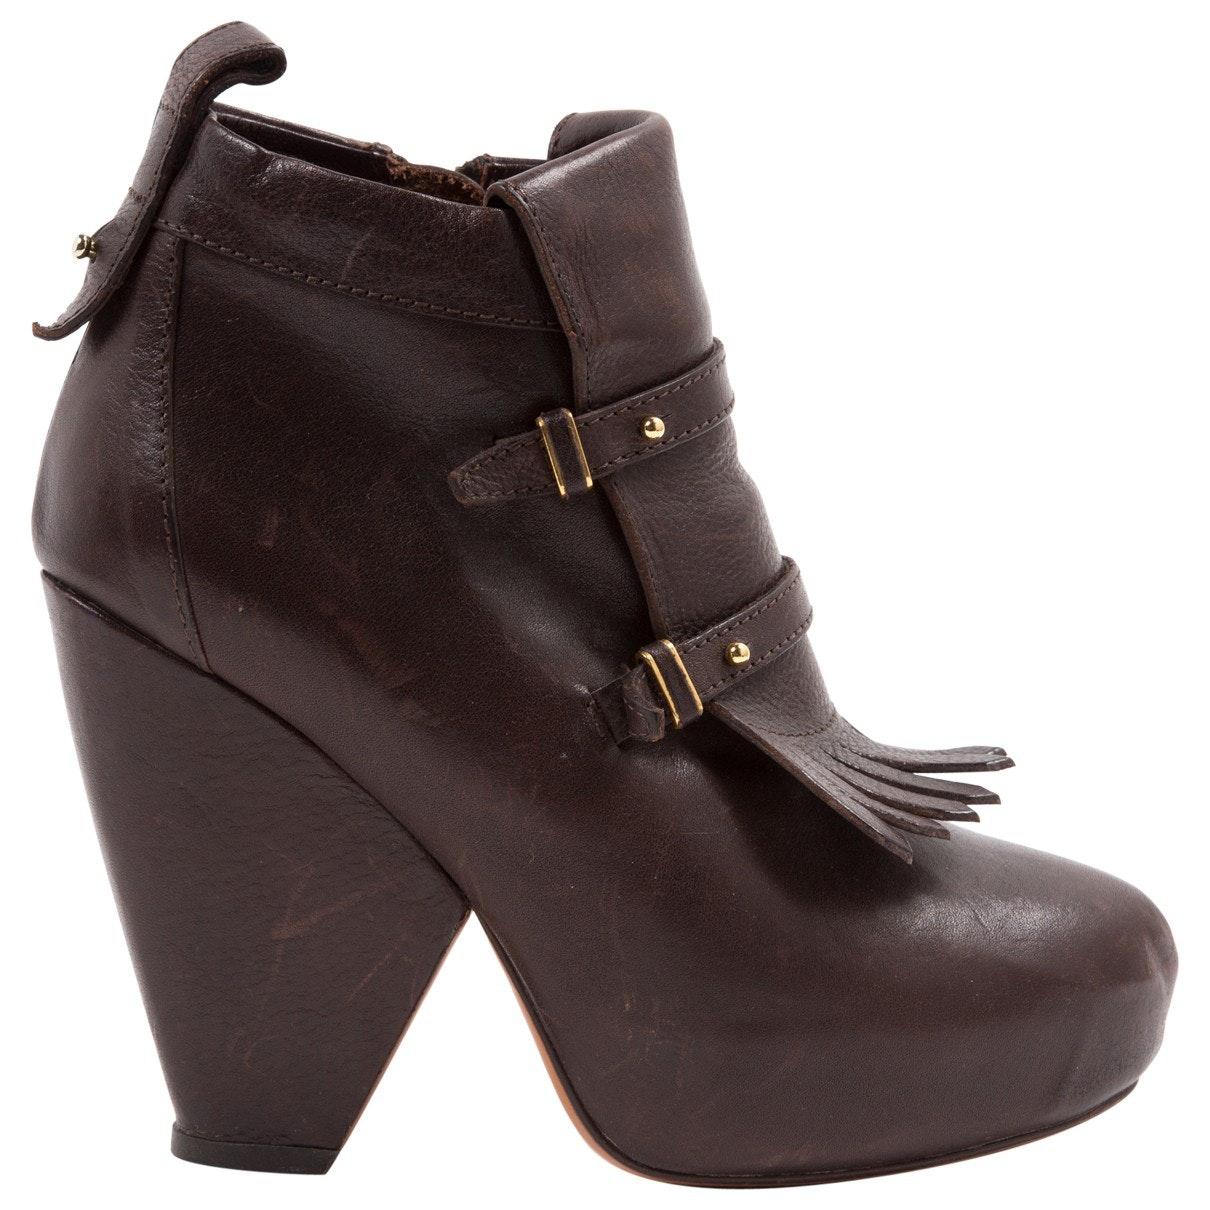 Vanessa Bruno Brown Leather Ankle Boots - Lyst